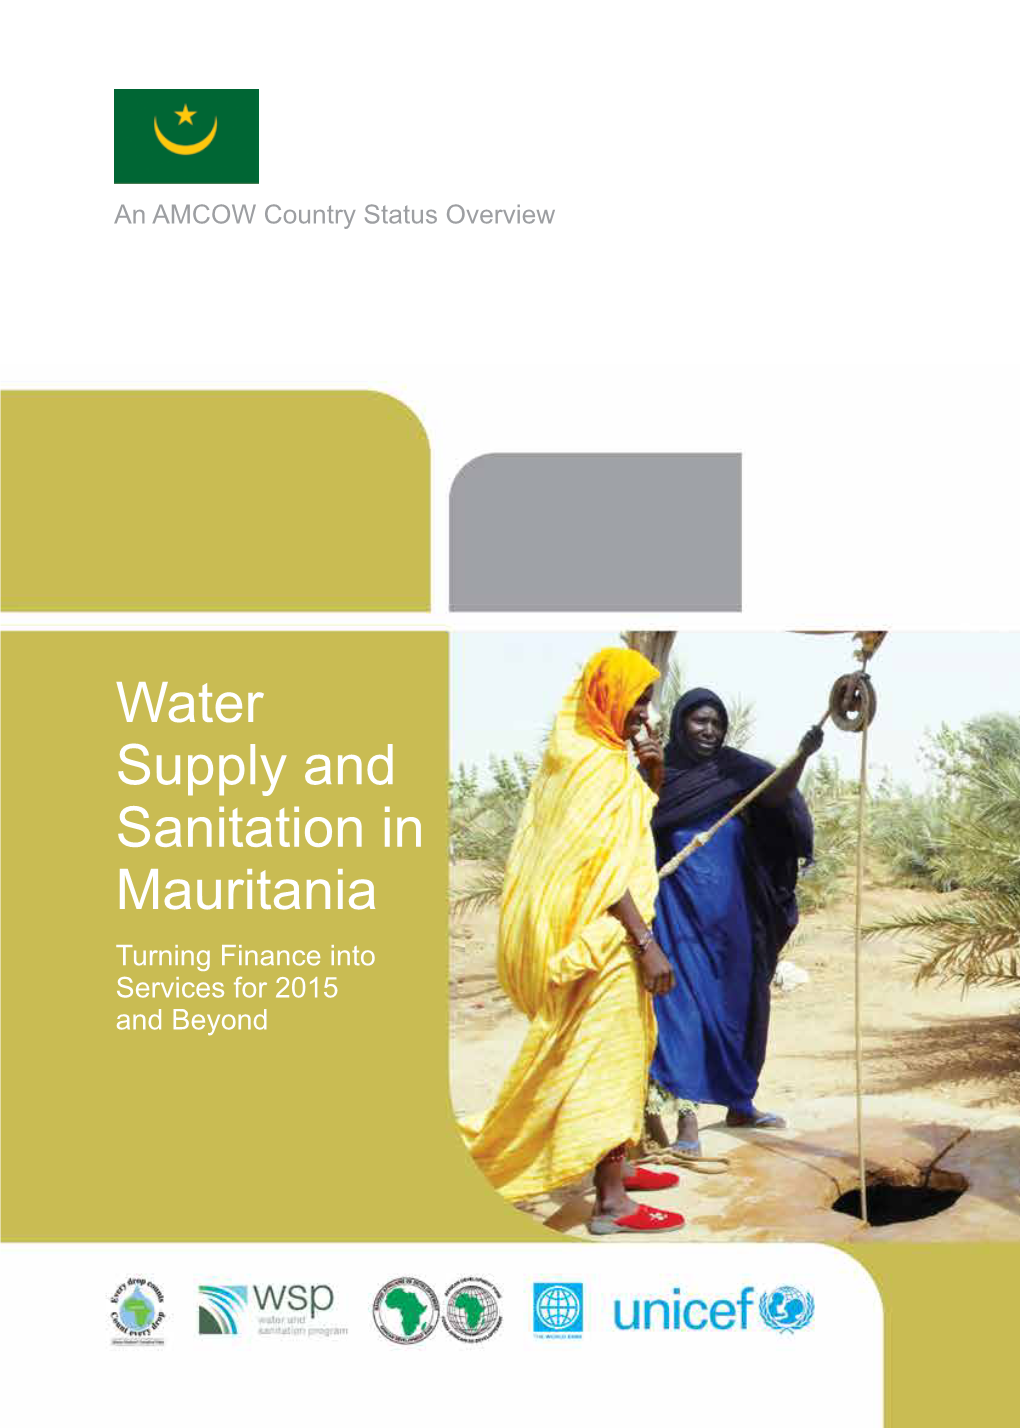 Water Supply and Sanitation in Mauritania Turning Finance Into Services for 2015 and Beyond